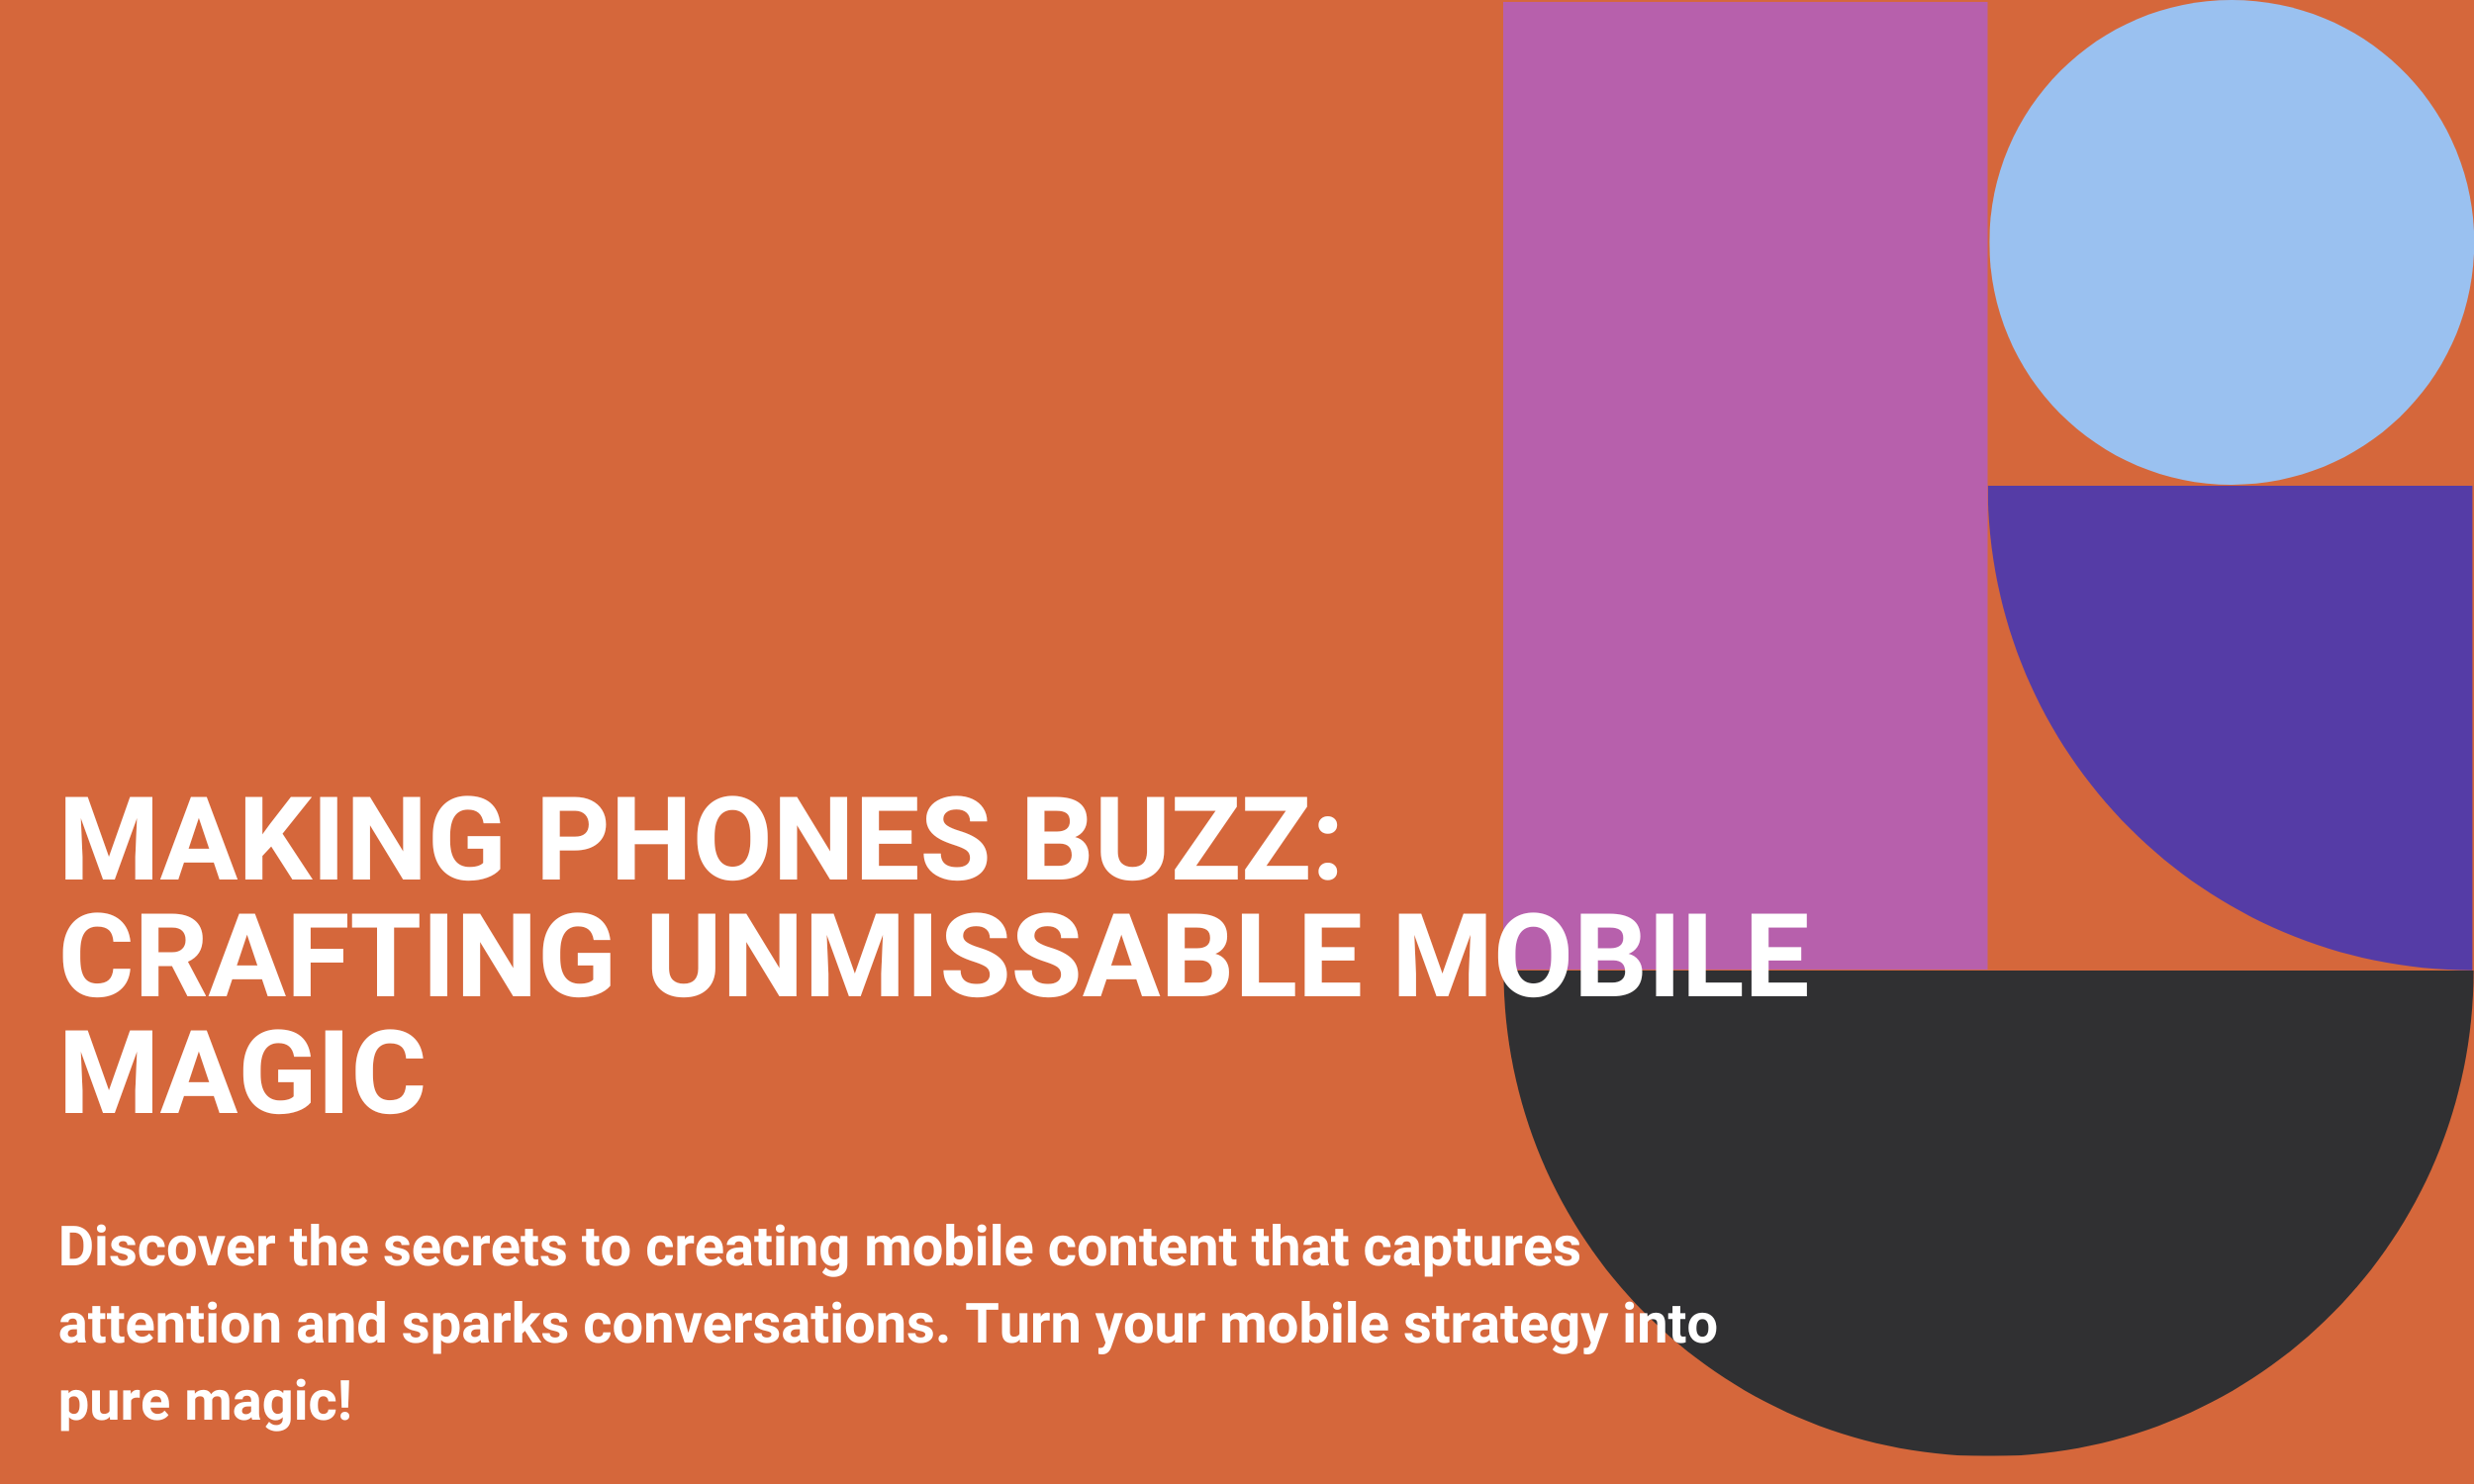  Making Phones Buzz: Crafting Unmissable Mobile Magic